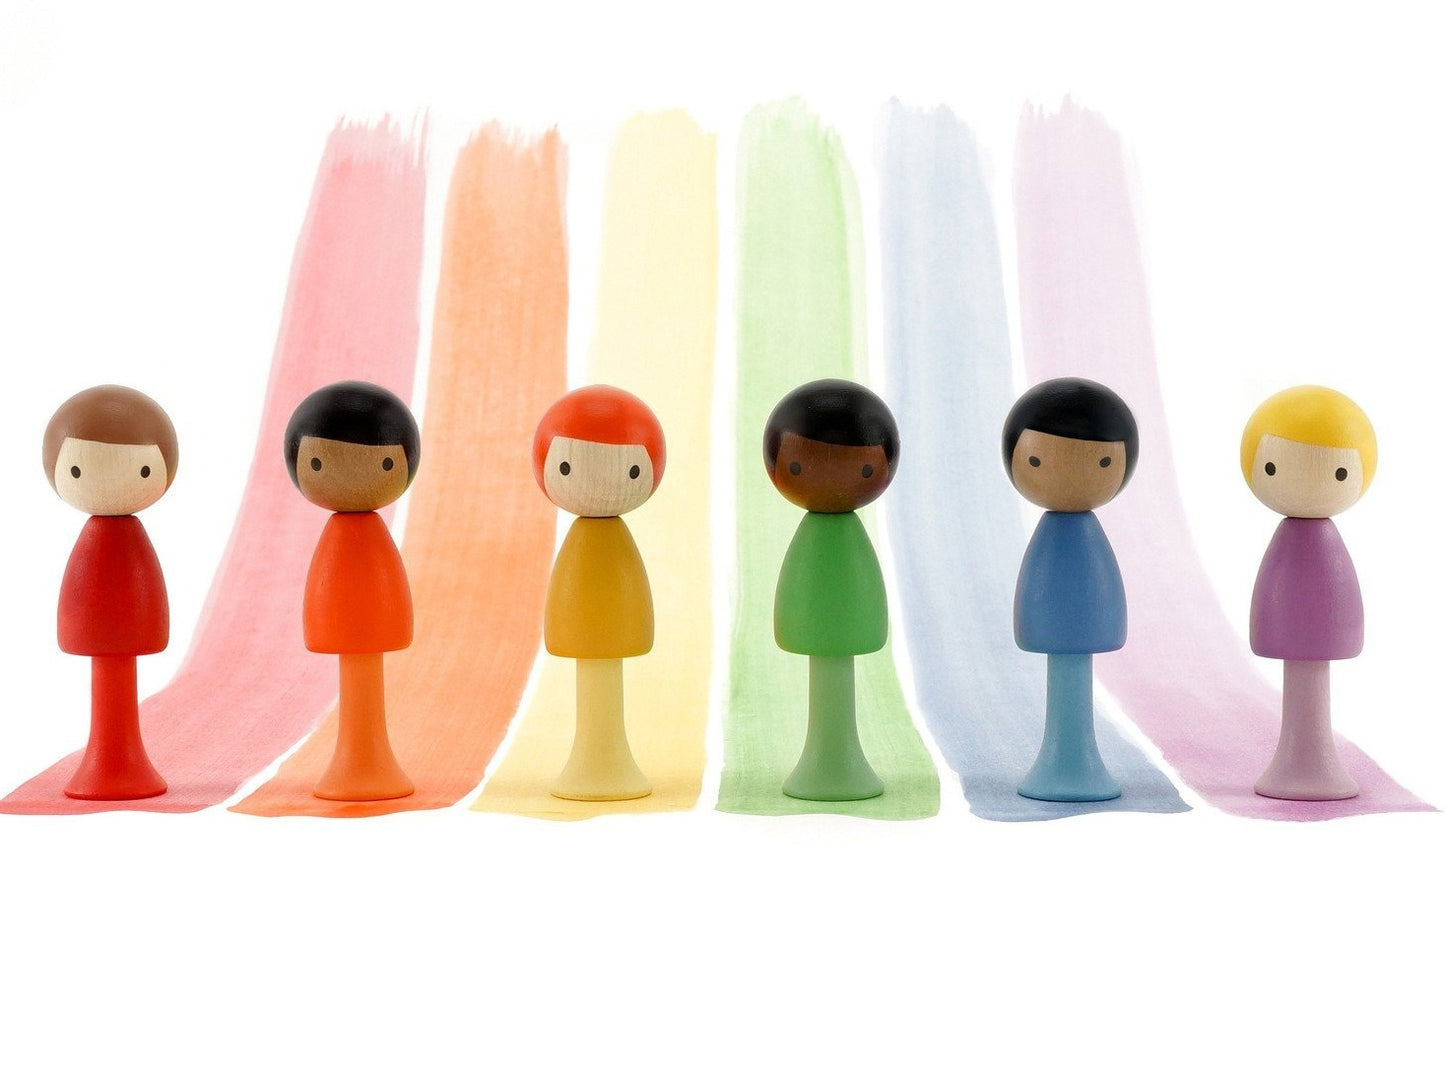 CLiCQUES Magnetic Figurines - RAINBOW Set (Andy, Rocco, Charles, Will, Riku & Paul) - Wood Wood Toys Canada's Favourite Montessori Toy Store